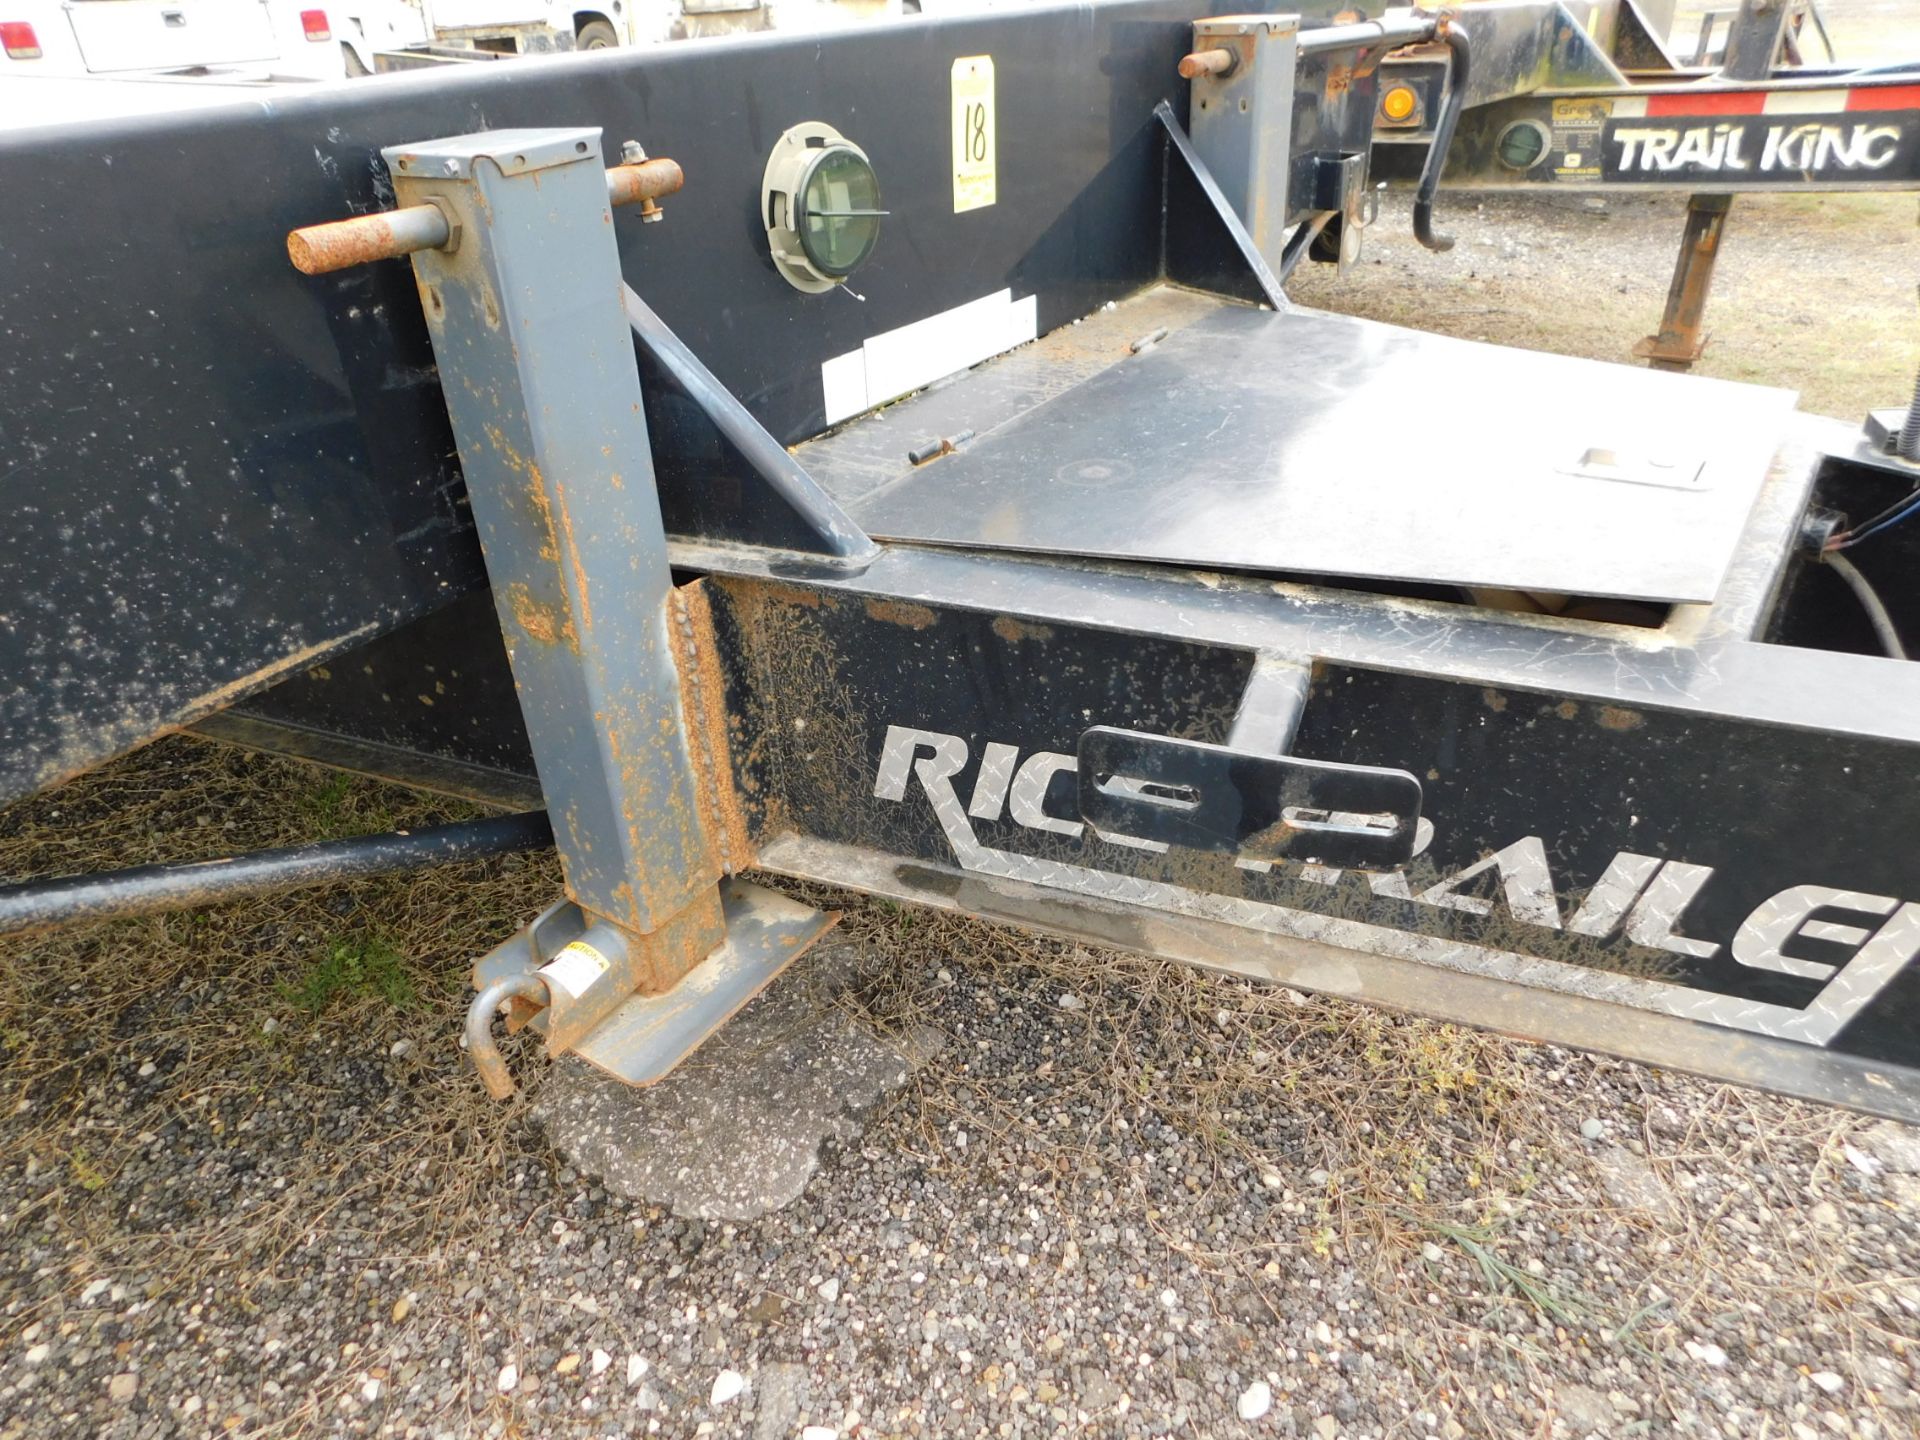 2015 Rice Trailers Tandem Axle Flat Bed Trailer, VIN 4RWR22021FH007796, Wooden Deck, 20 ft. Long, - Image 7 of 12